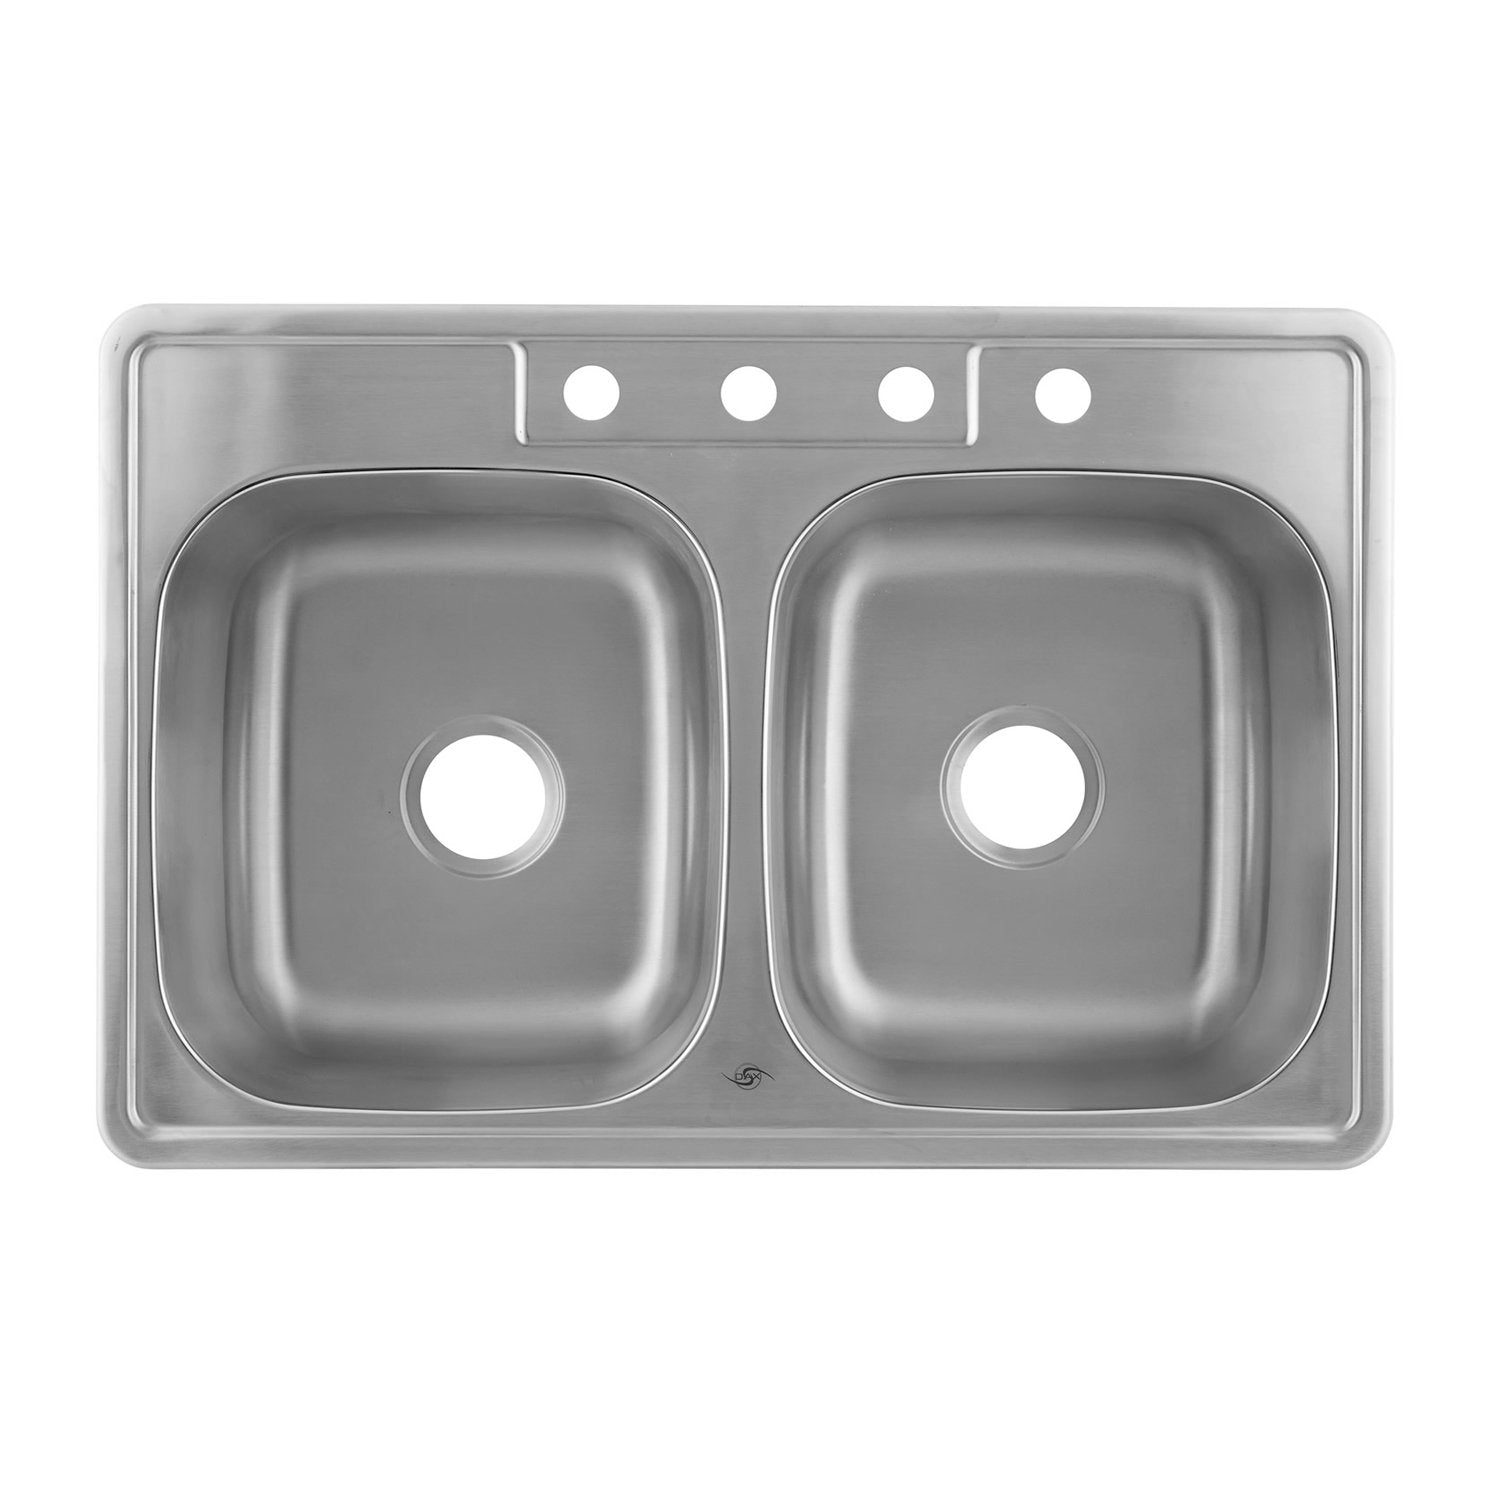 DAX 50/50 Double Bowl Top Mount Kitchen Sink, 20 Gauge Stainless Steel, Brushed Finish , 33 x 22 x 9 Inches (DAX-OM-3322)